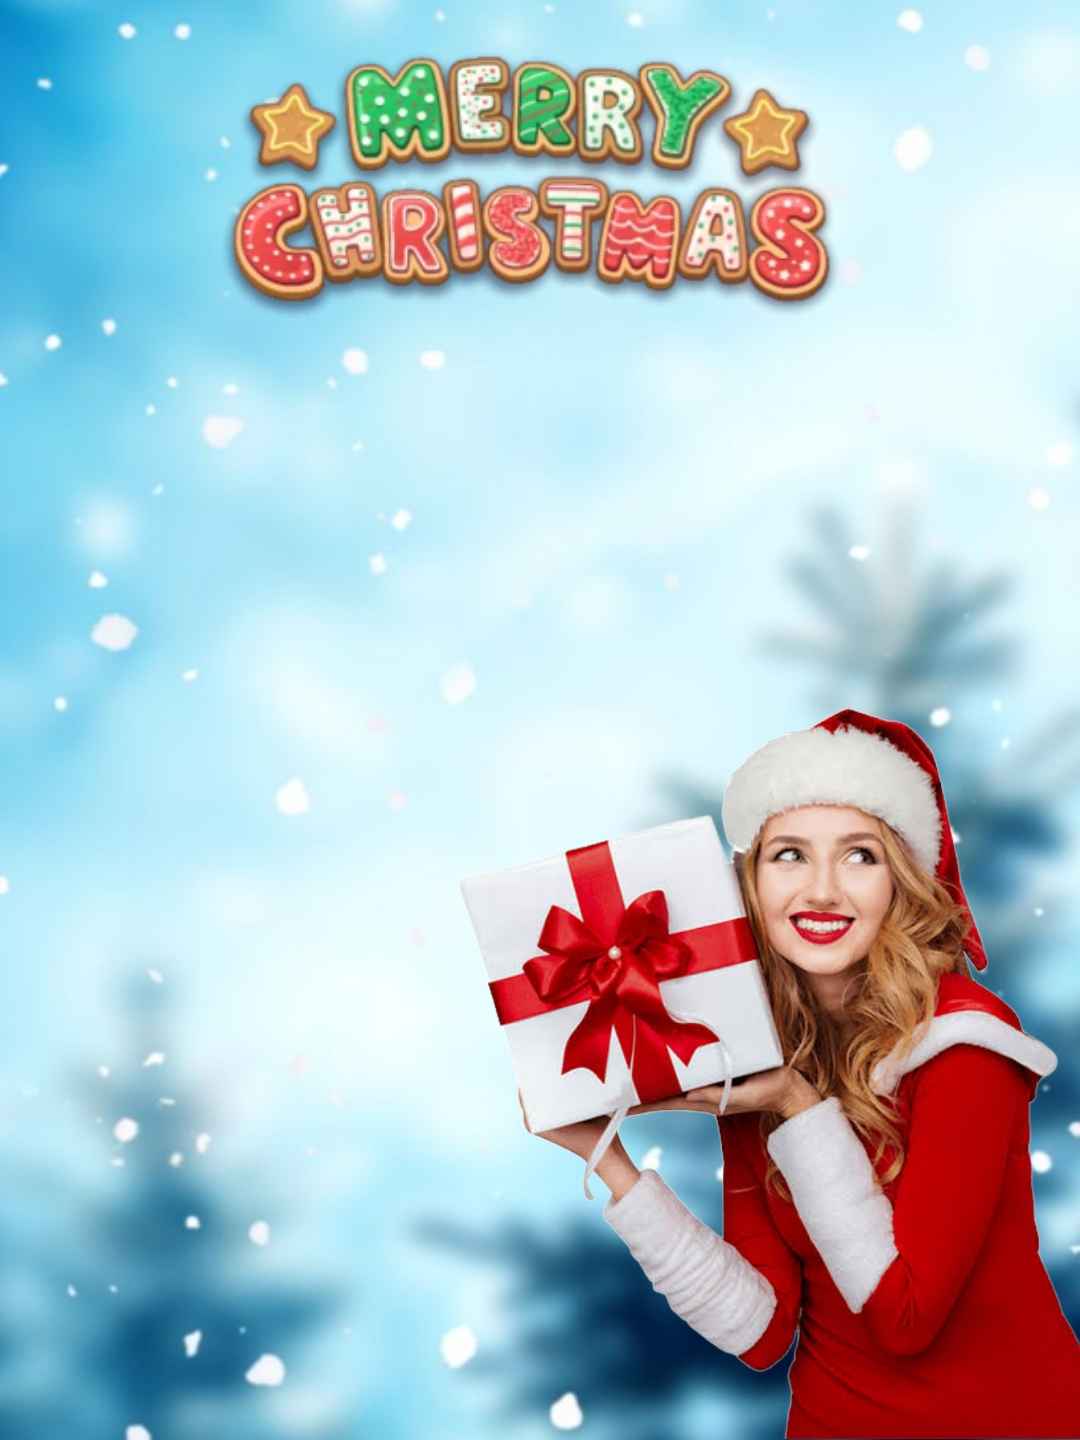 Merry Christmas HD Backgrounds With Girls For Editing